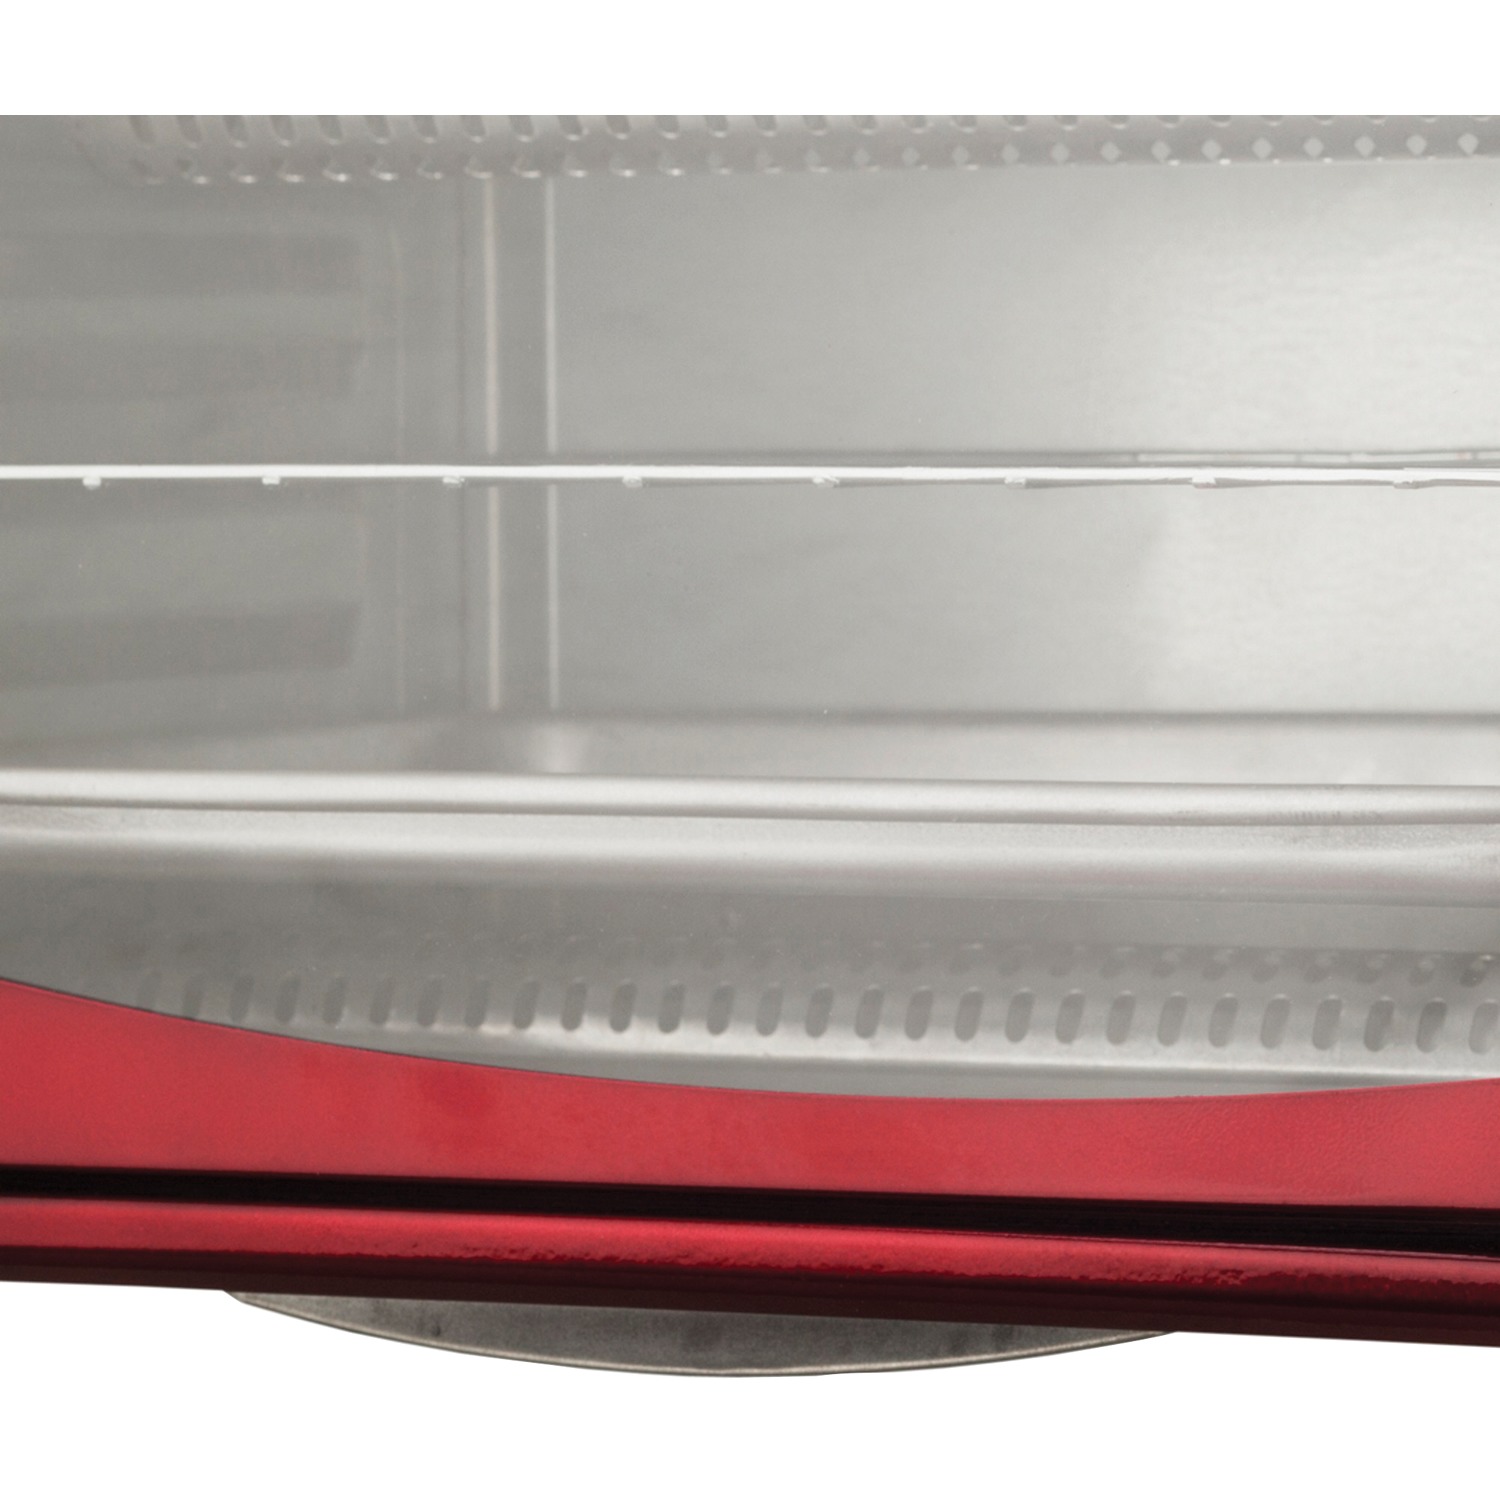 Brentwood Appliances TS-345R Stainless Steel 4 Slice Toaster Oven, Ruby Red - image 4 of 5